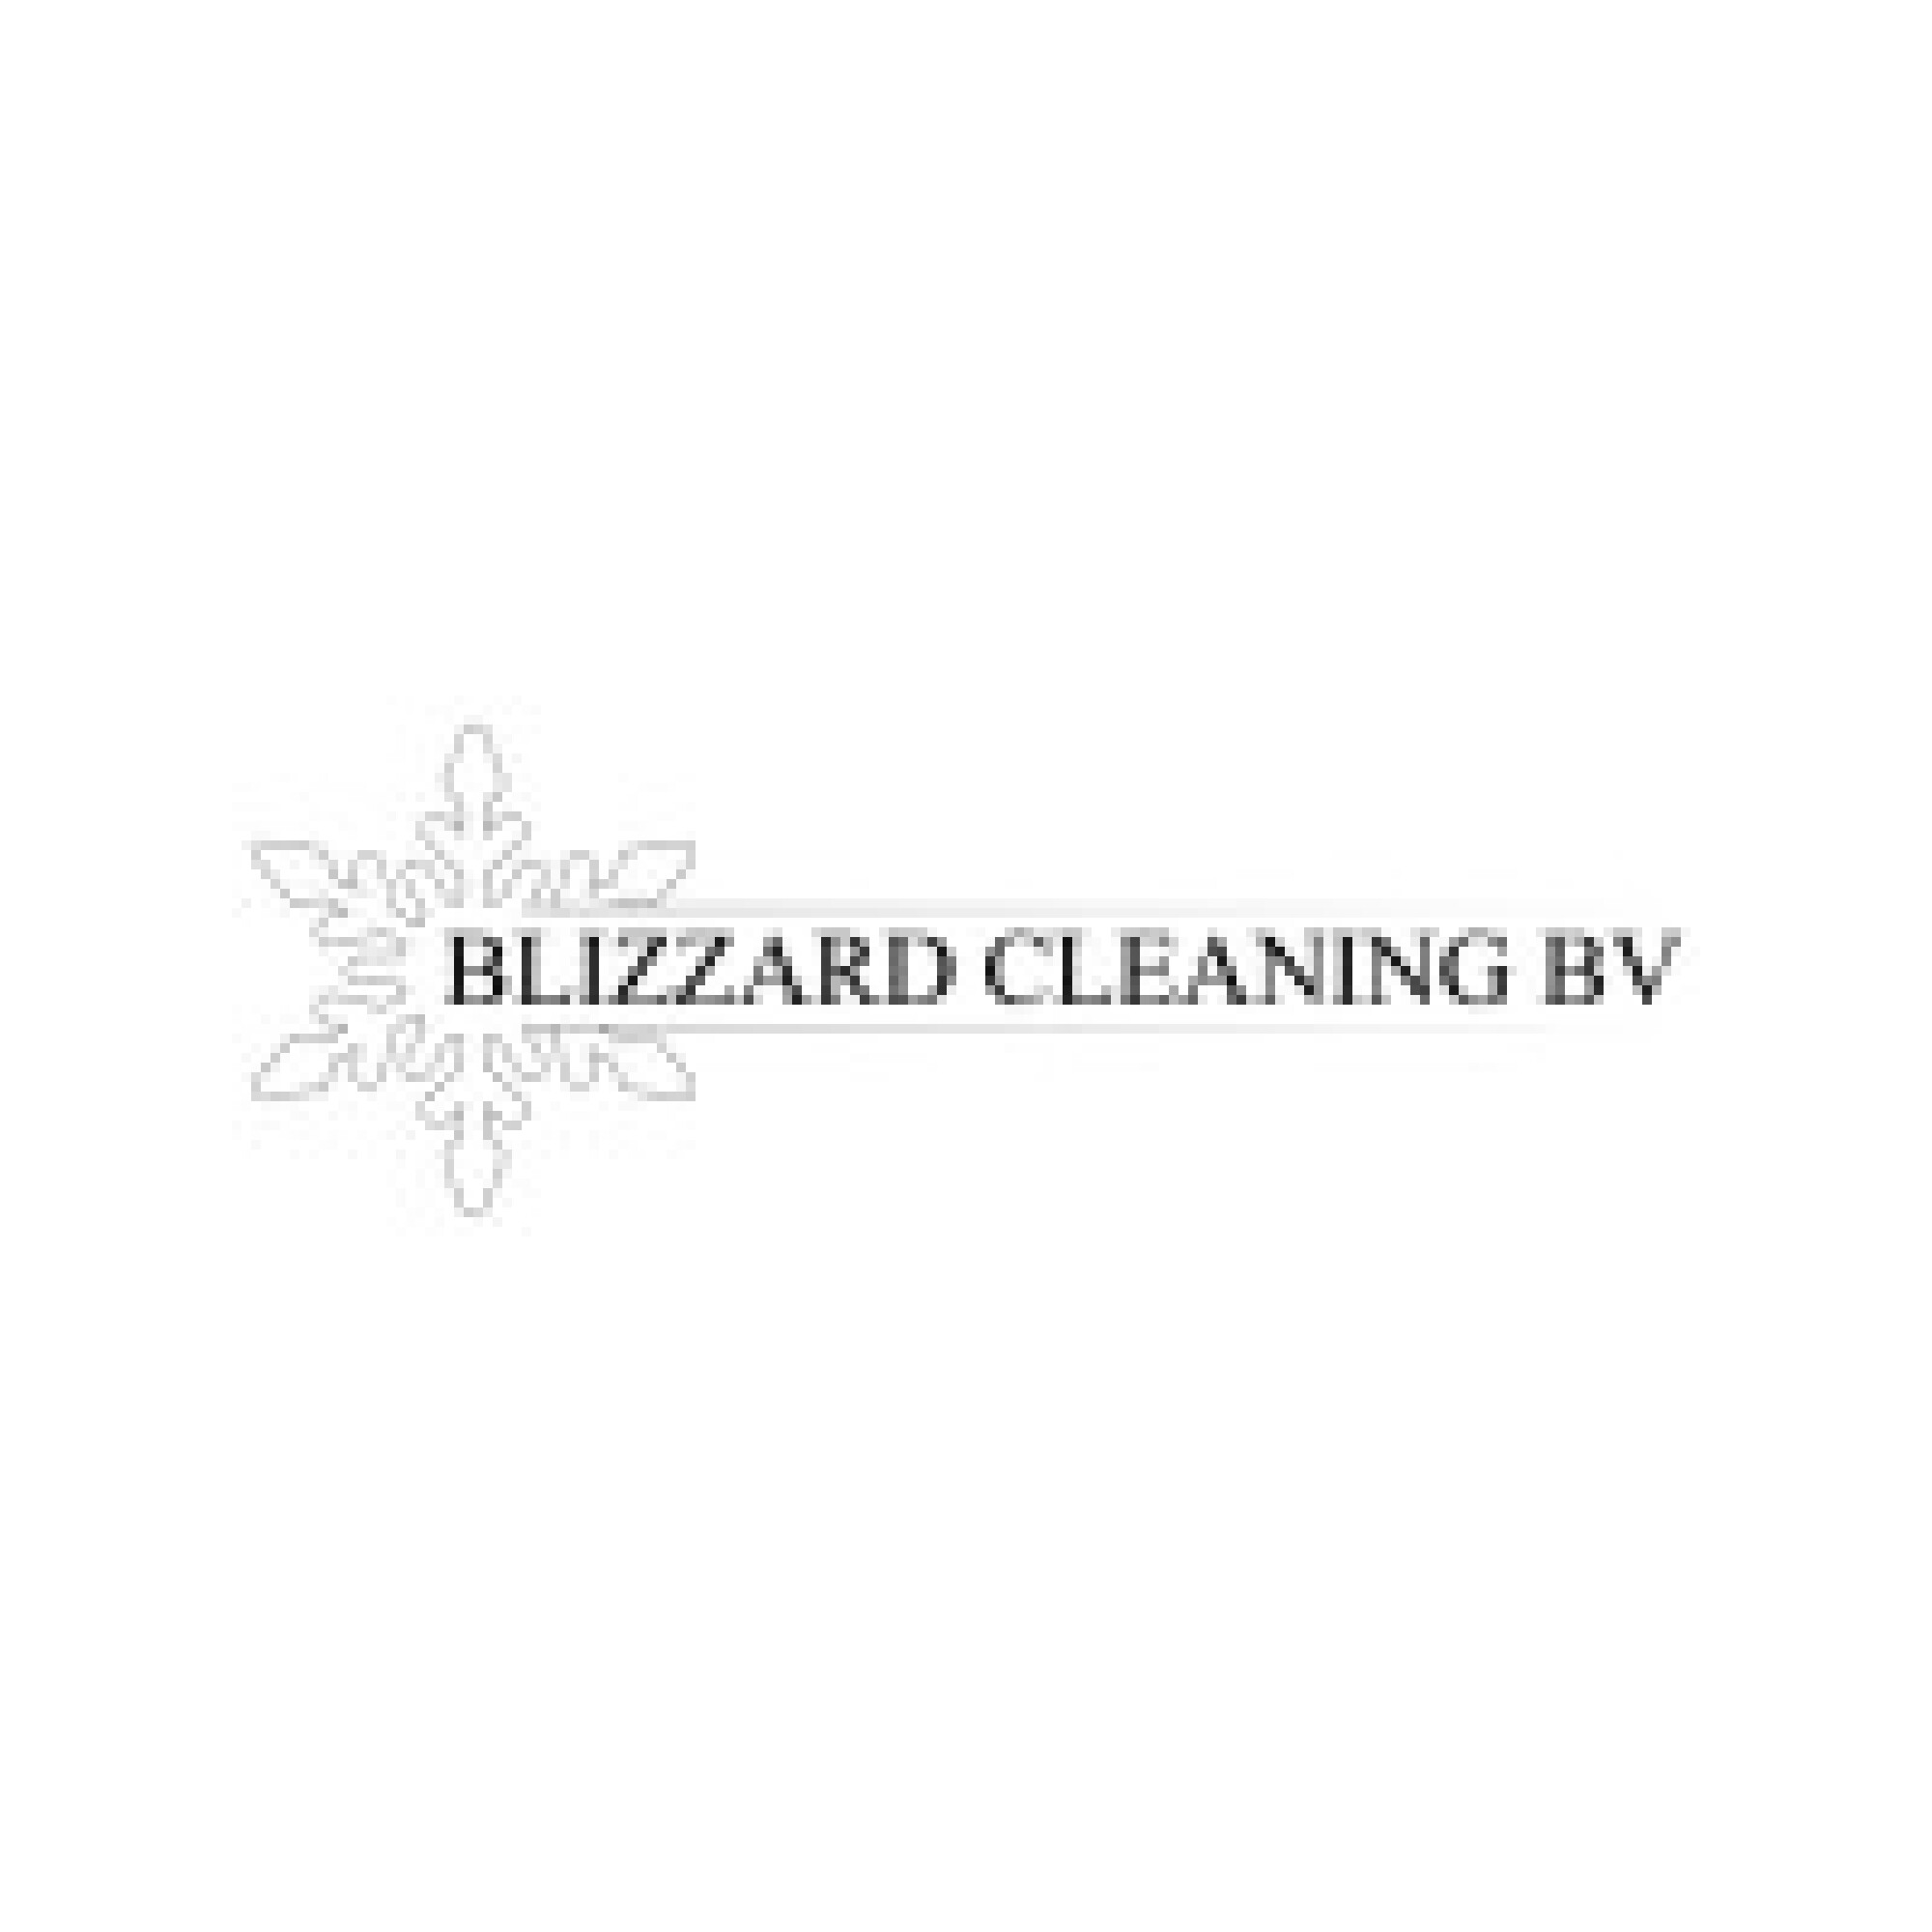 Blizzard Cleaning